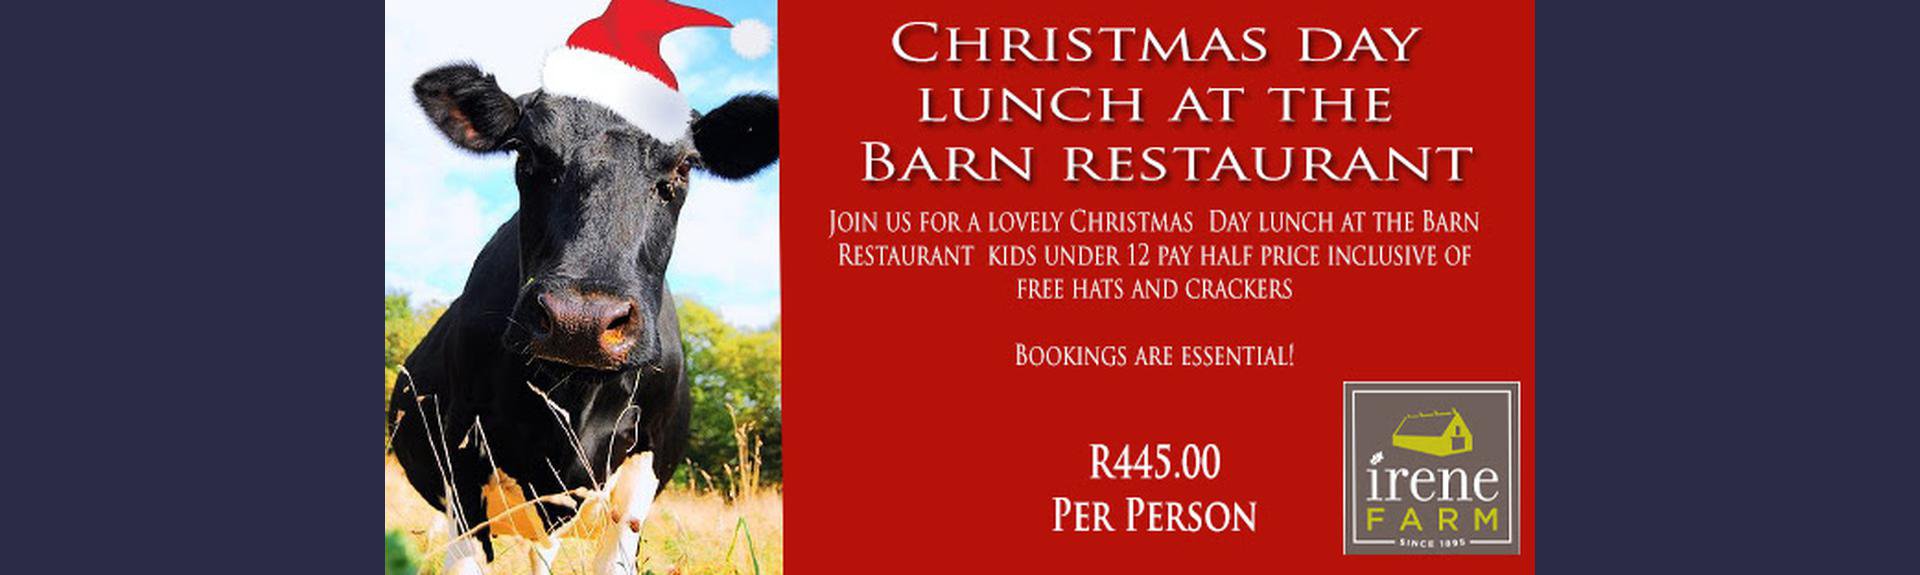 Christmas Day Lunch at The Barn Restaurant